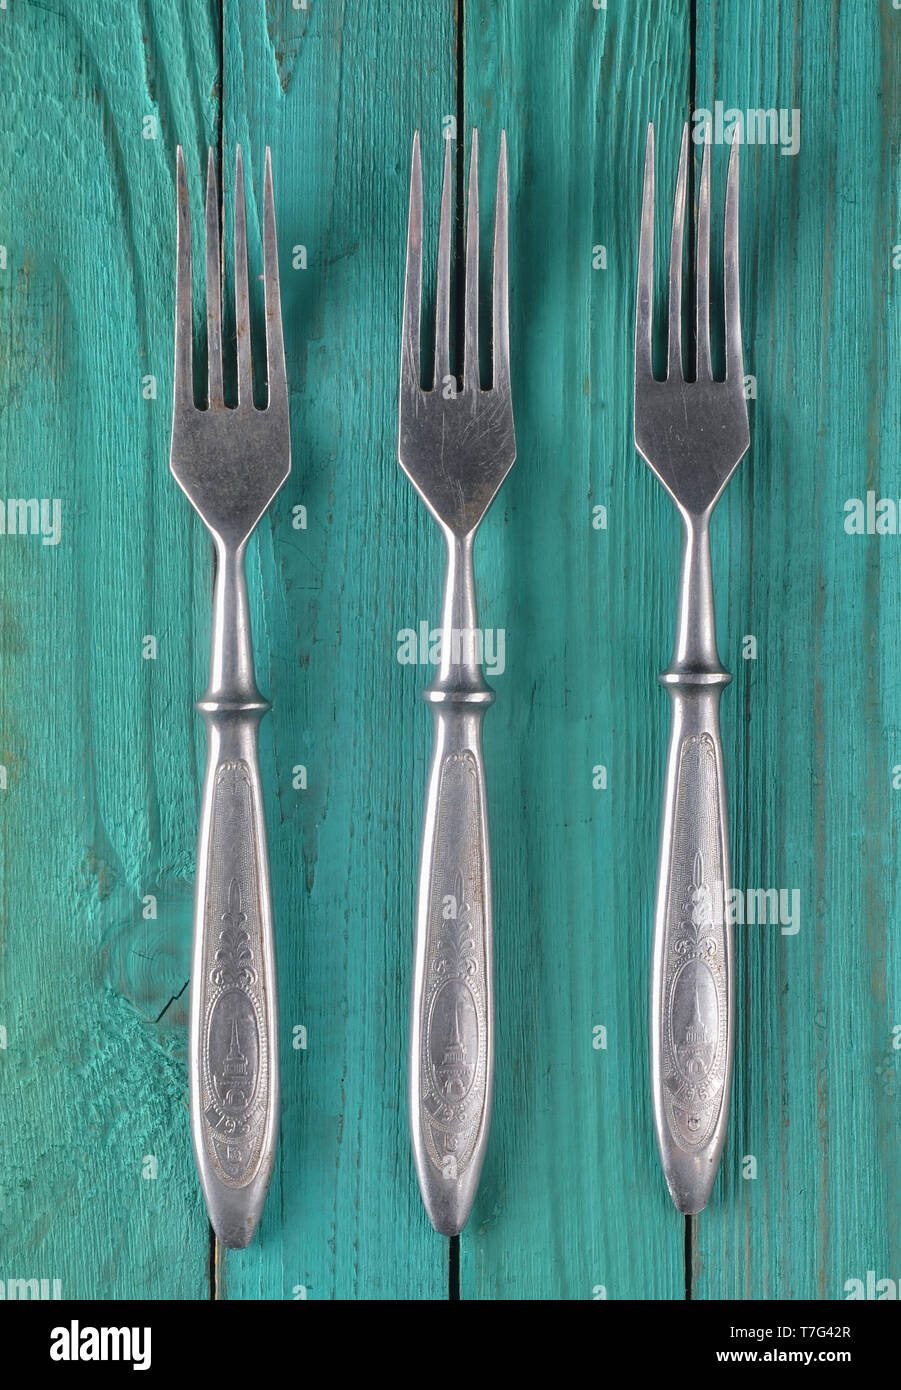 A set of forks on a green wooden surface. Top view. Stock Photo